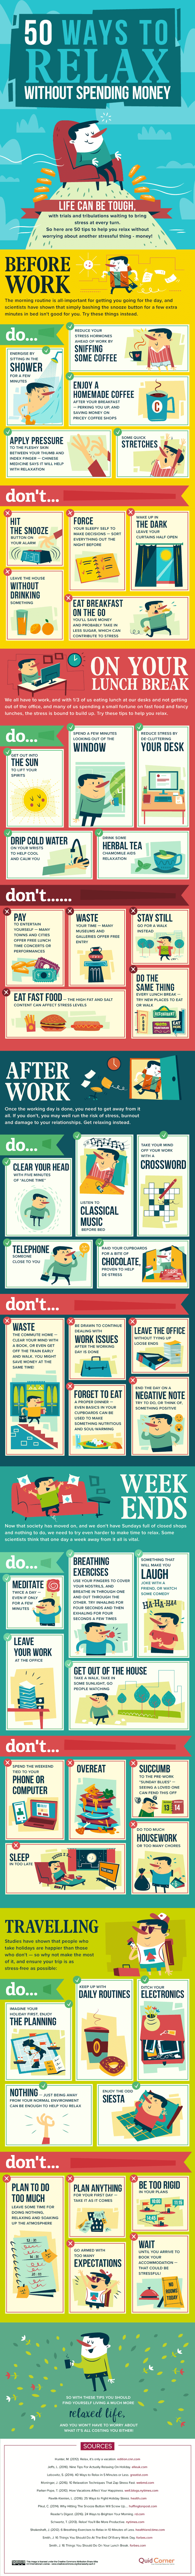 50 Ways To Relax That Don’t Cost A Cent [Infographic]